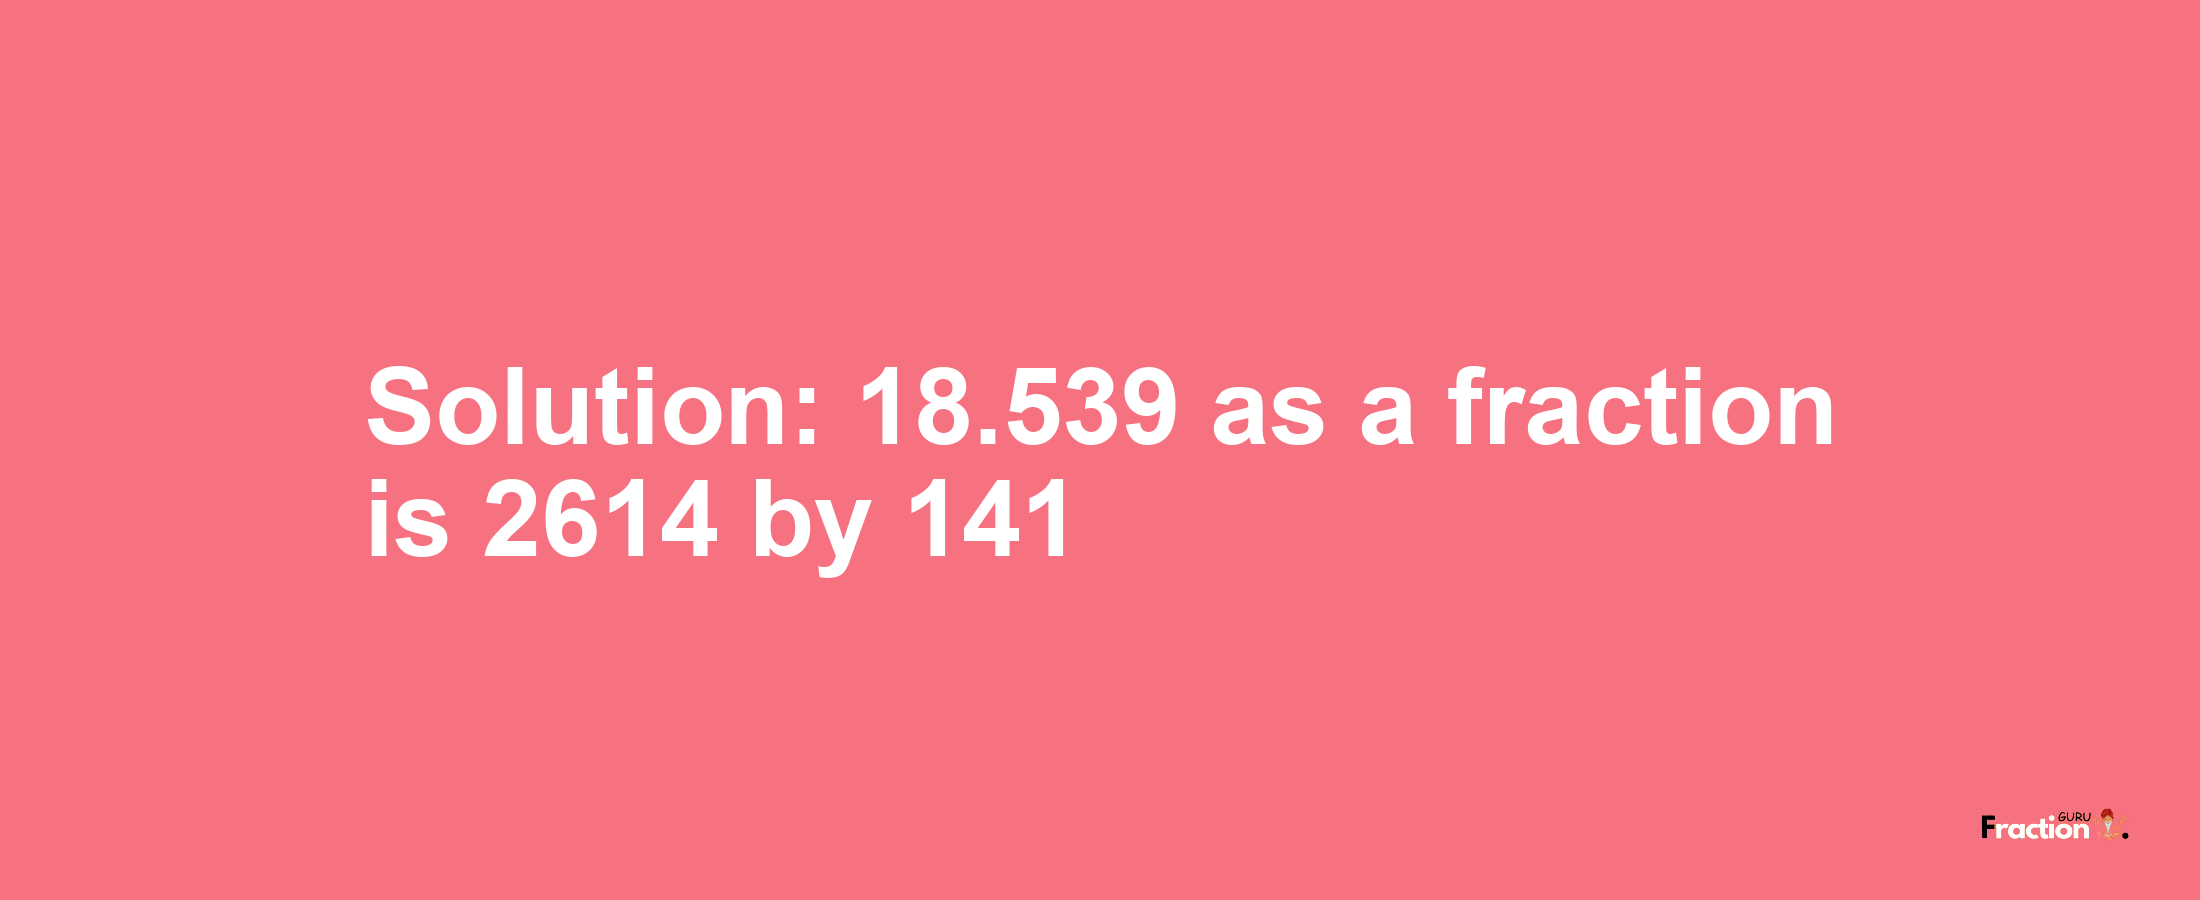 Solution:18.539 as a fraction is 2614/141